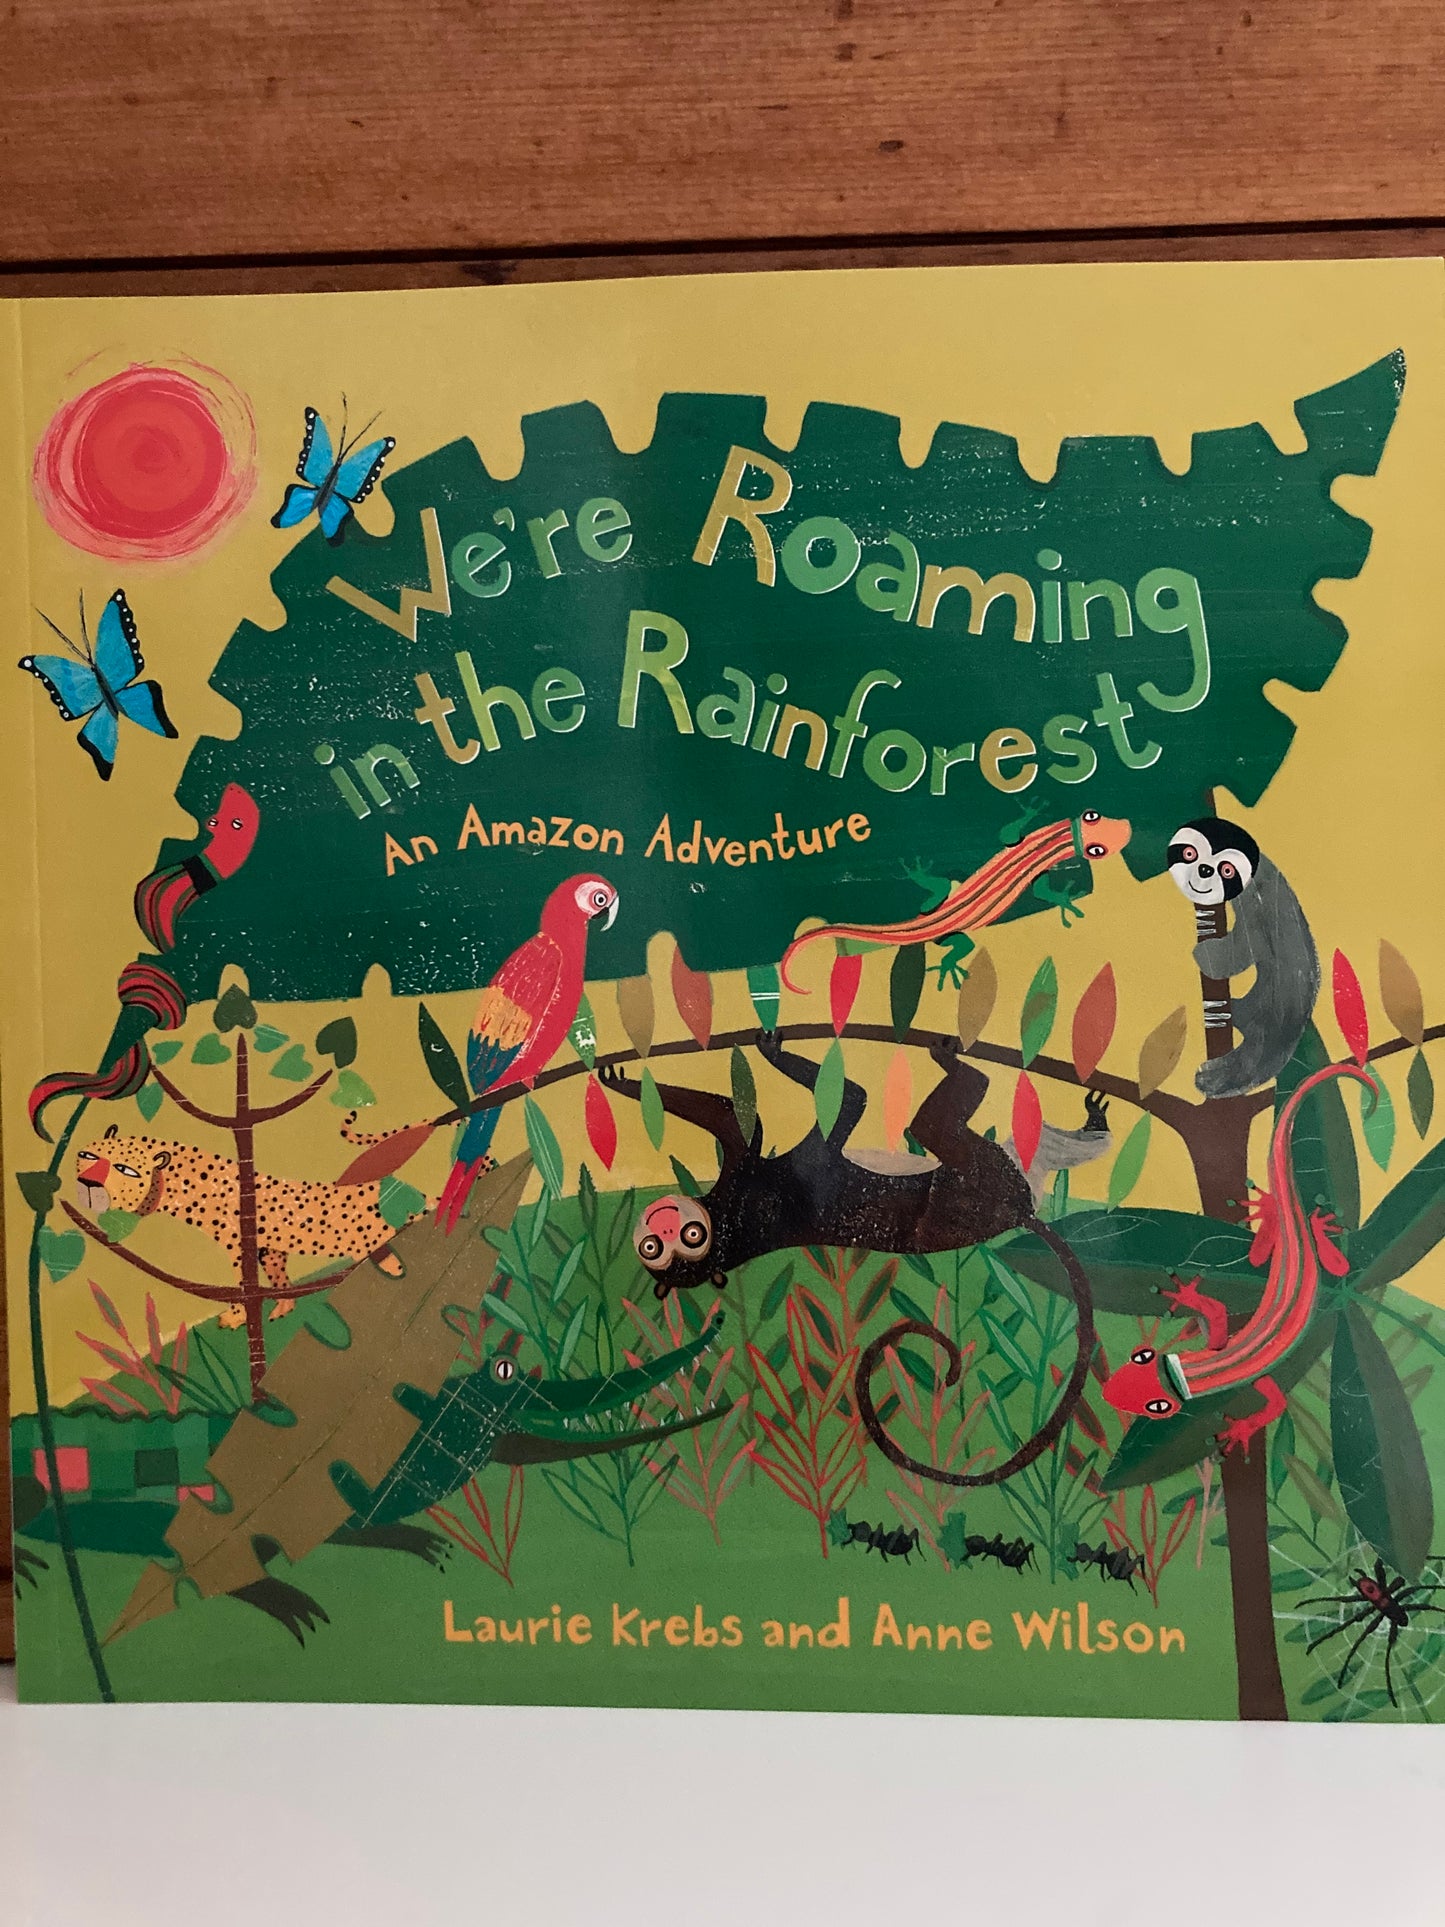 Educational Children’s Picture Book - WE’RE ROAMING IN THE RAINFOREST